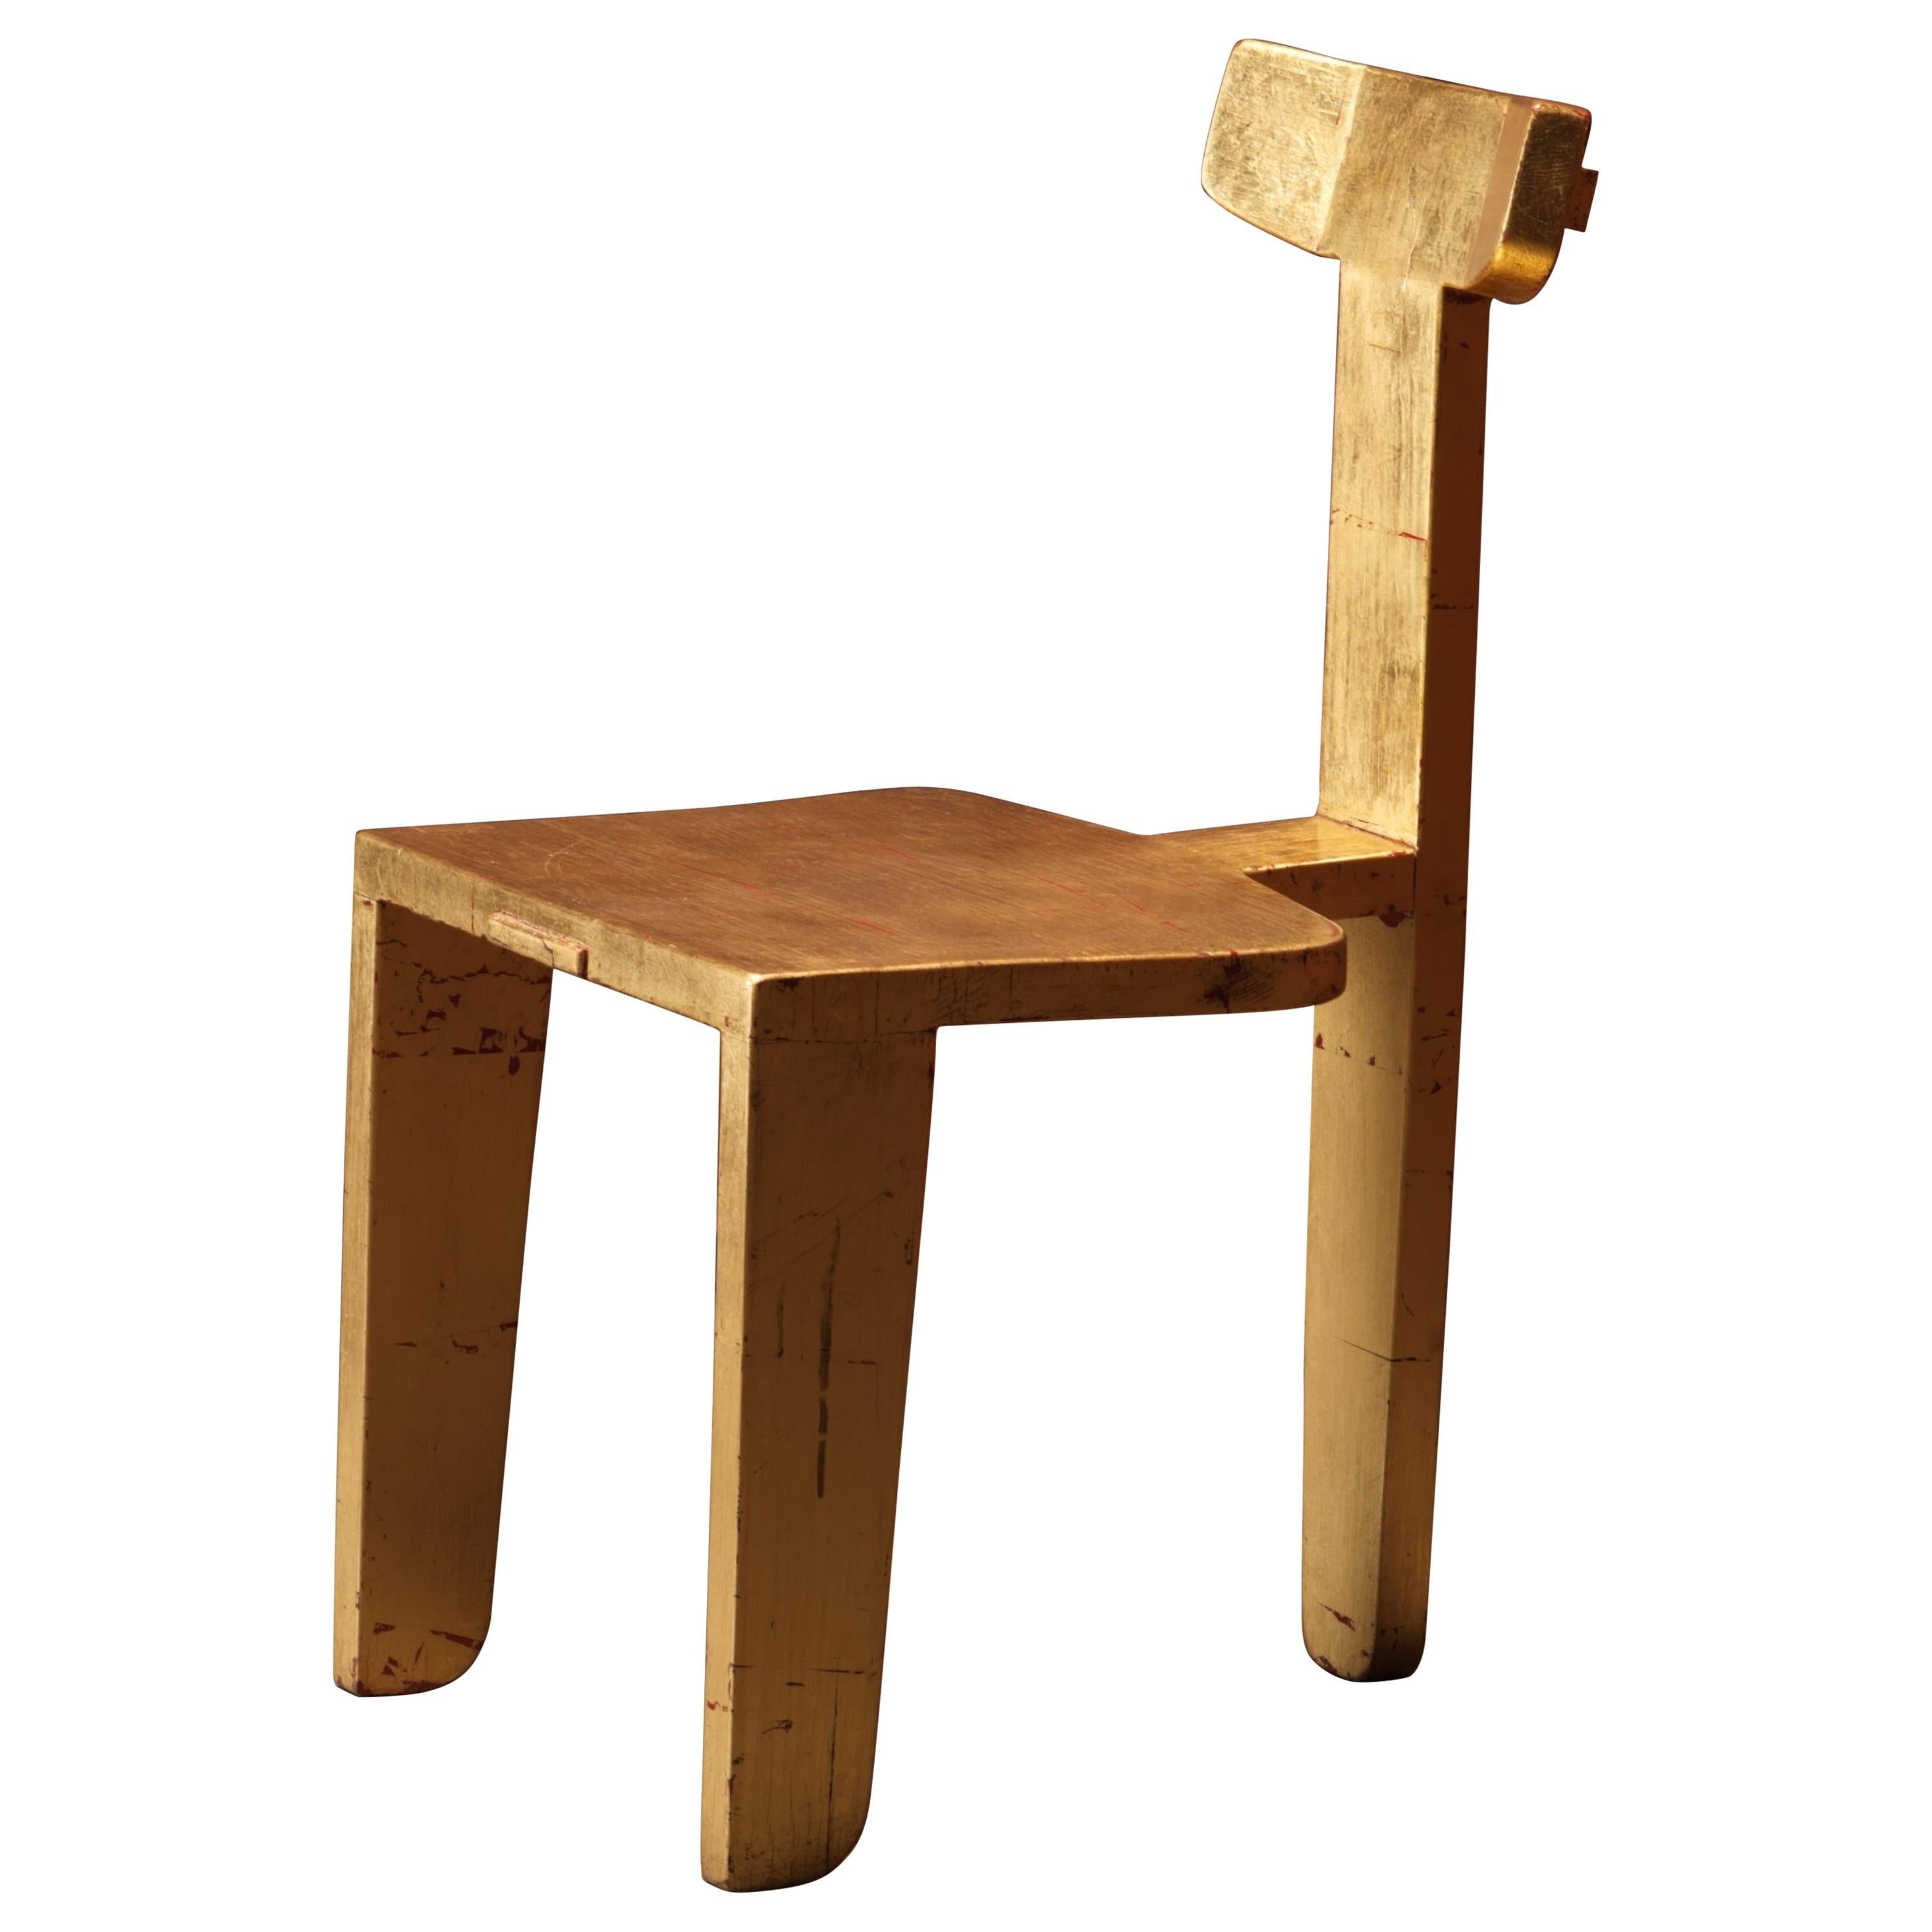 Laredo Gold Leaf Chair, 3-Legged Contemporary Design w/Traditional Joinery For Sale